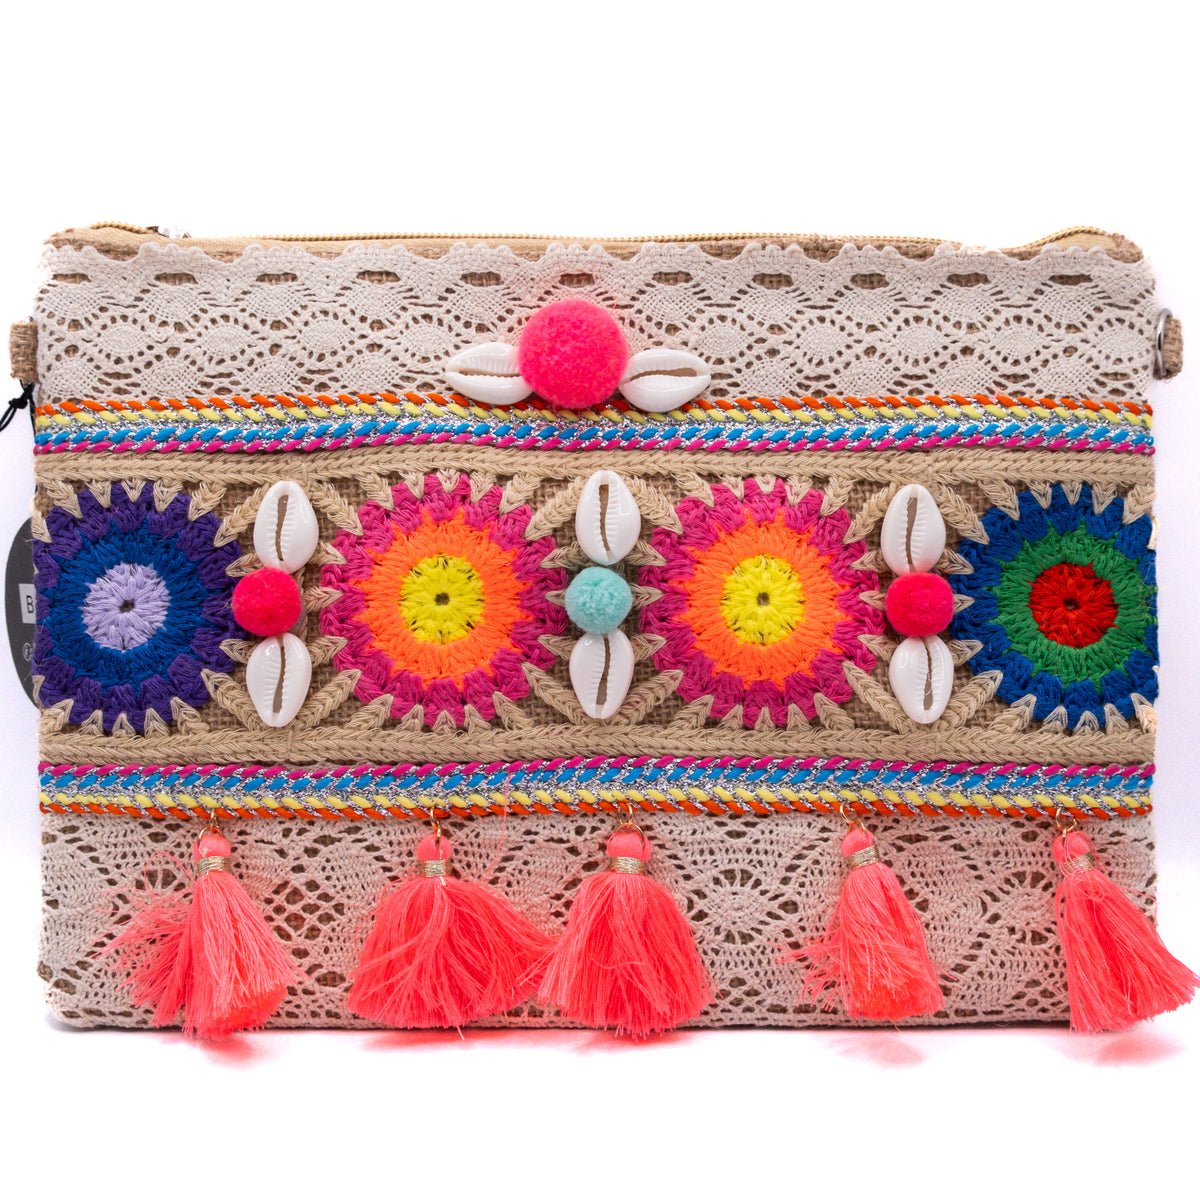 The Cayman Clutch Bags